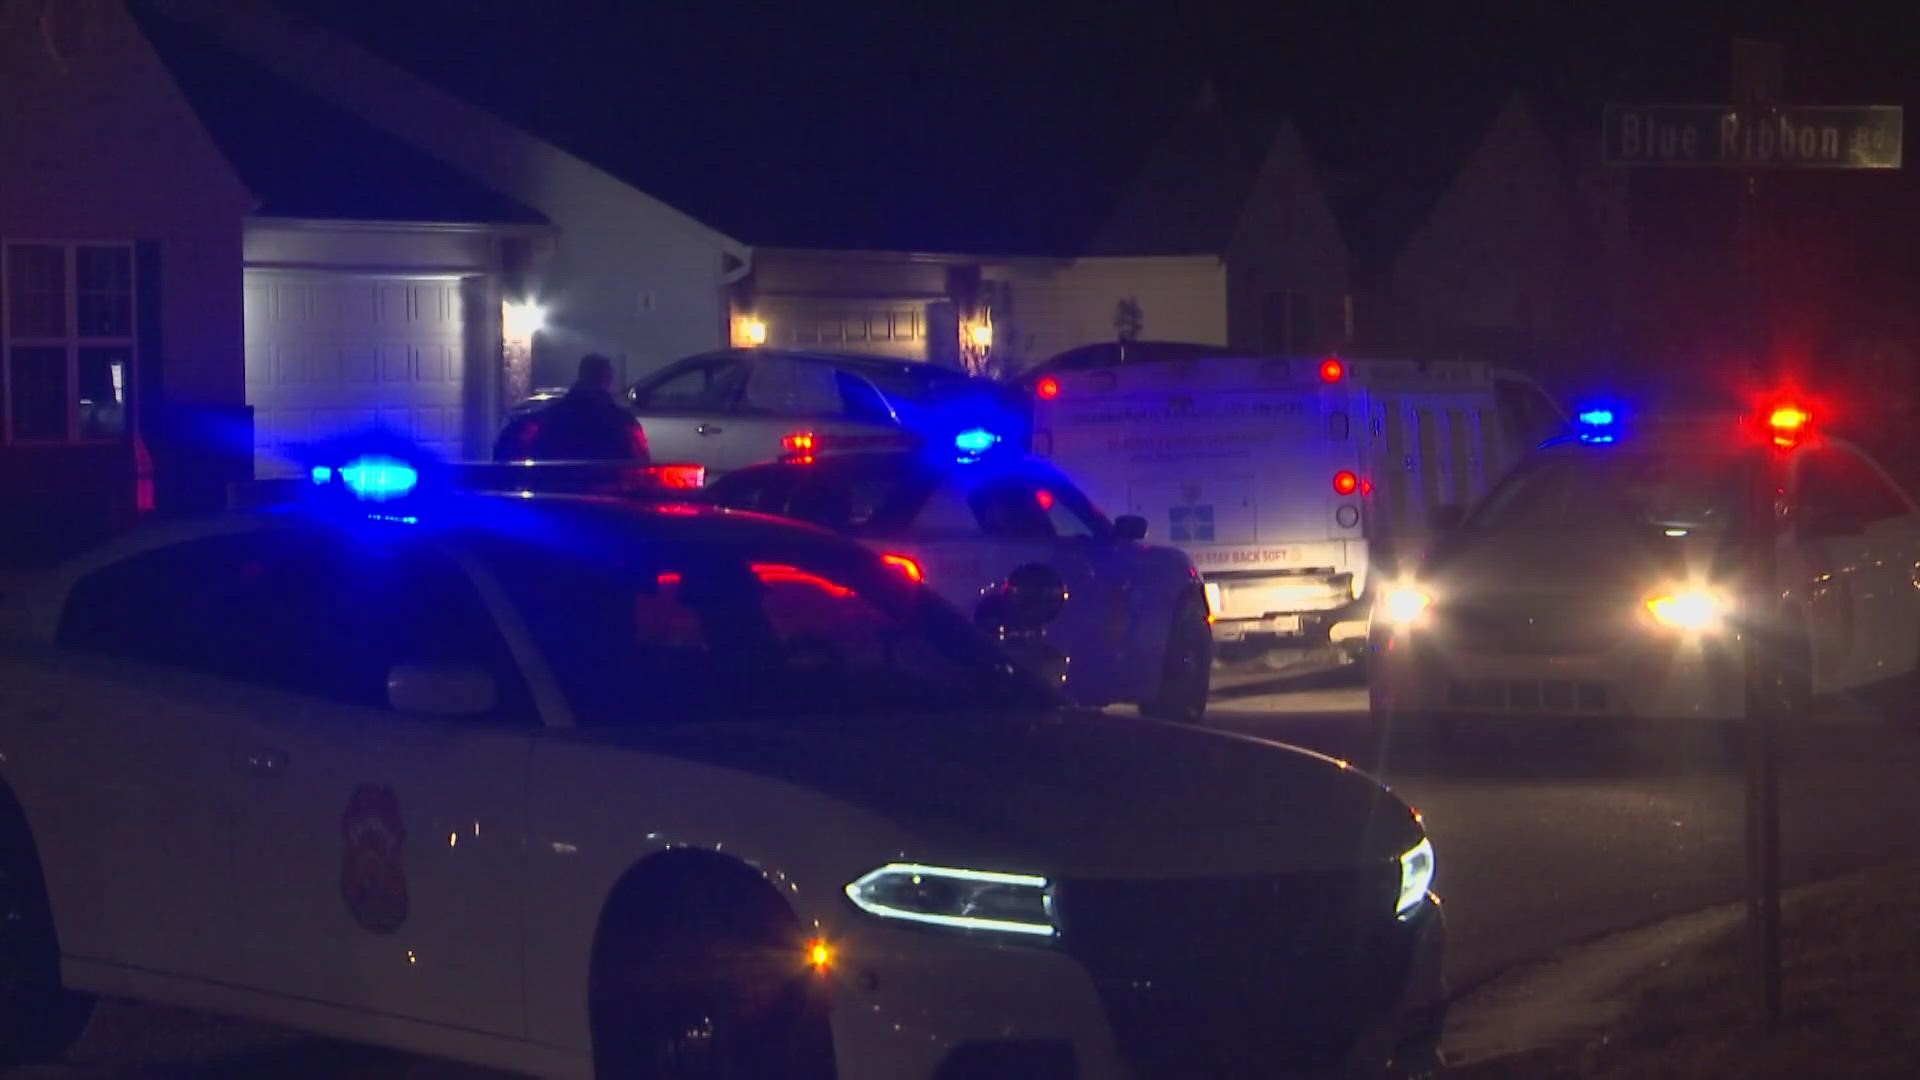 IMPD officers responded to a reported shooting at a house on Tansy Court, near Interstate 465 and South Arlington Avenue, shortly before 7 p.m.